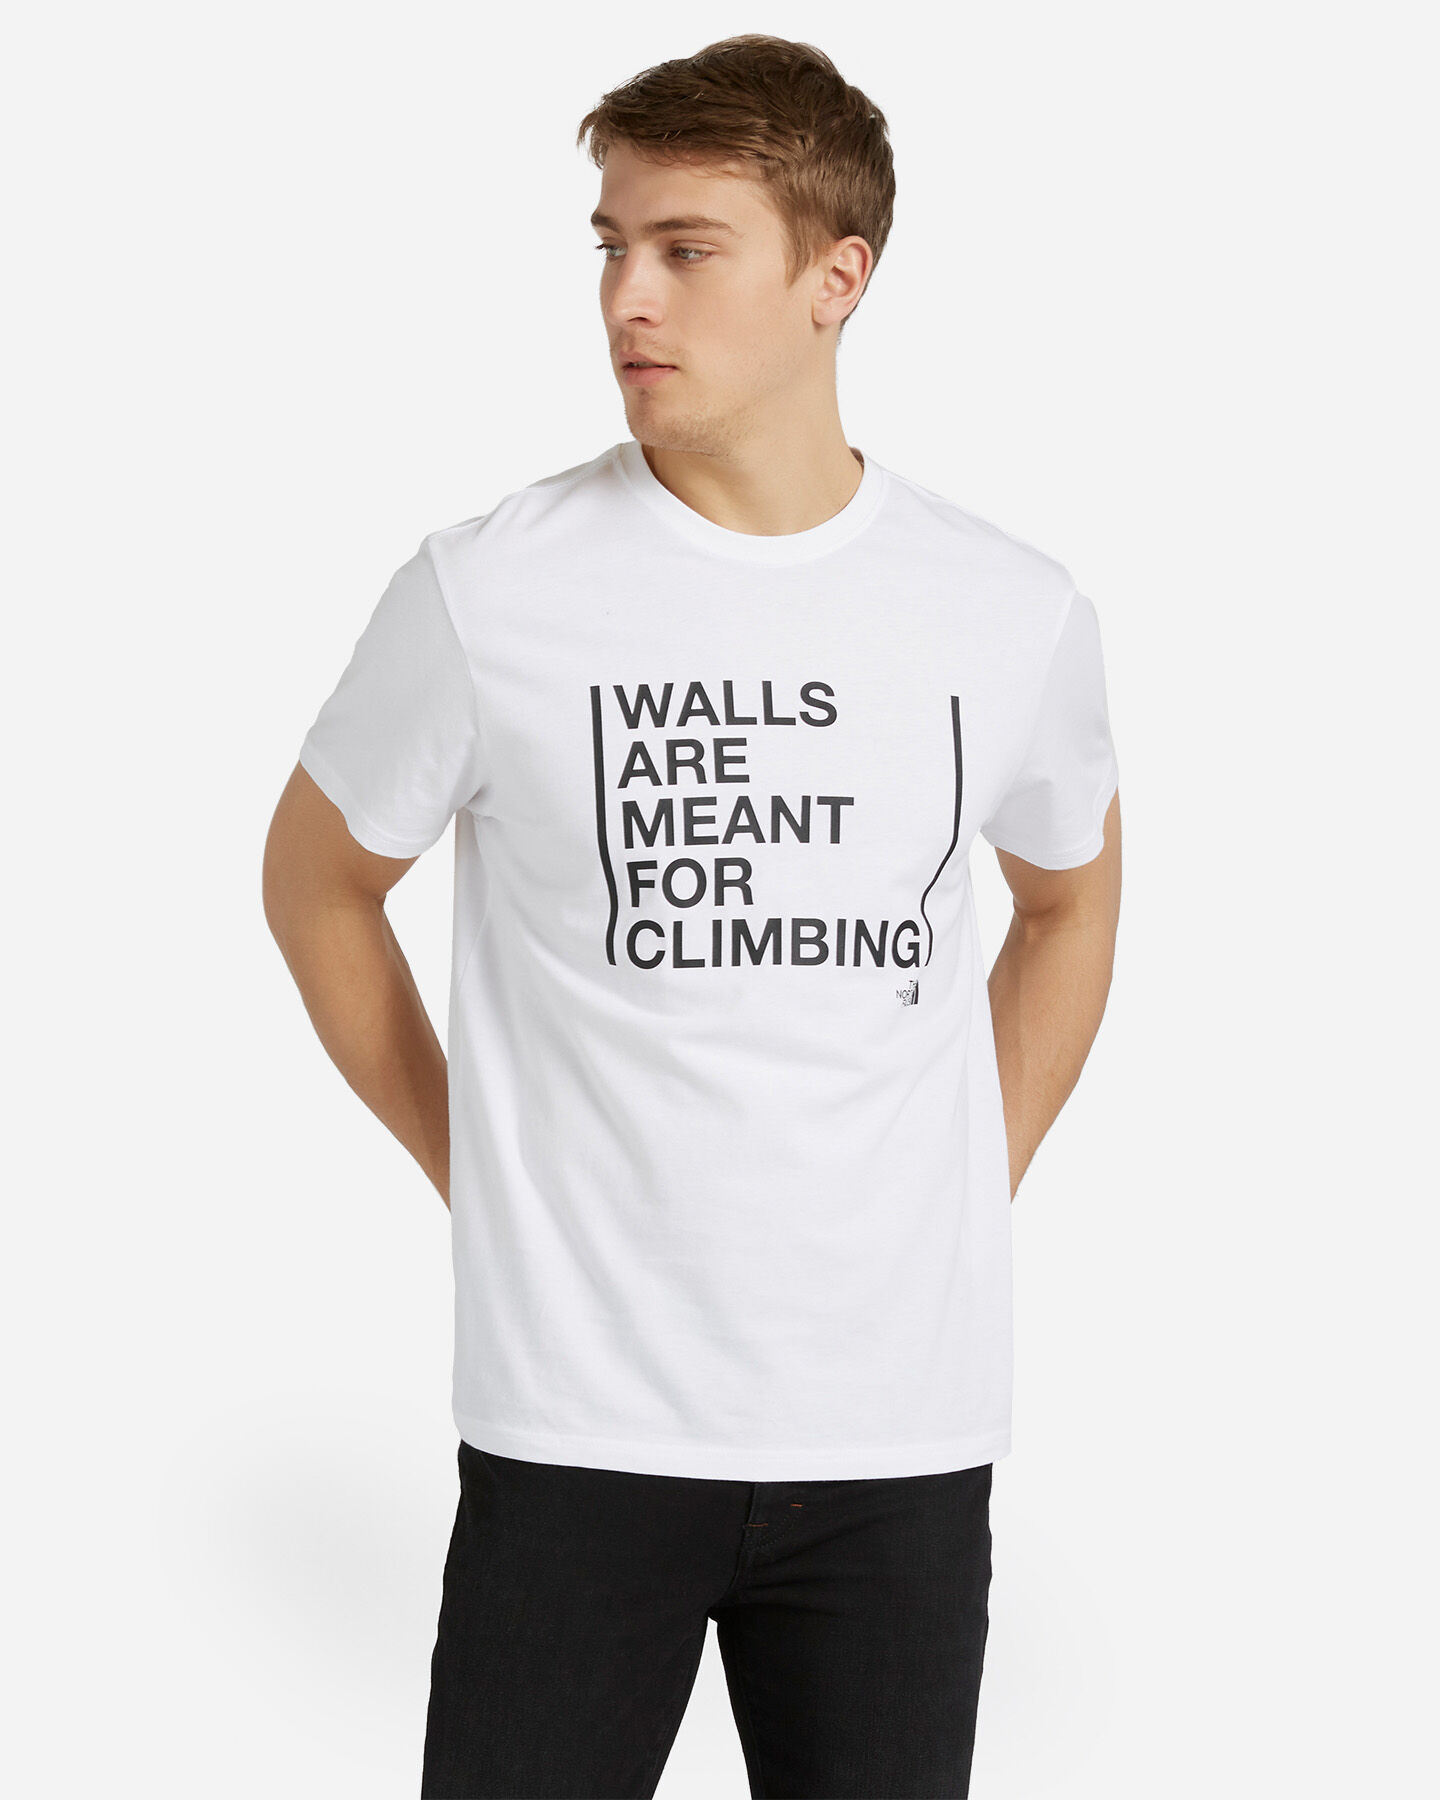  T-Shirt THE NORTH FACE WALLS ARE FOR CLIMBING M S5018692|FN4|XS scatto 0